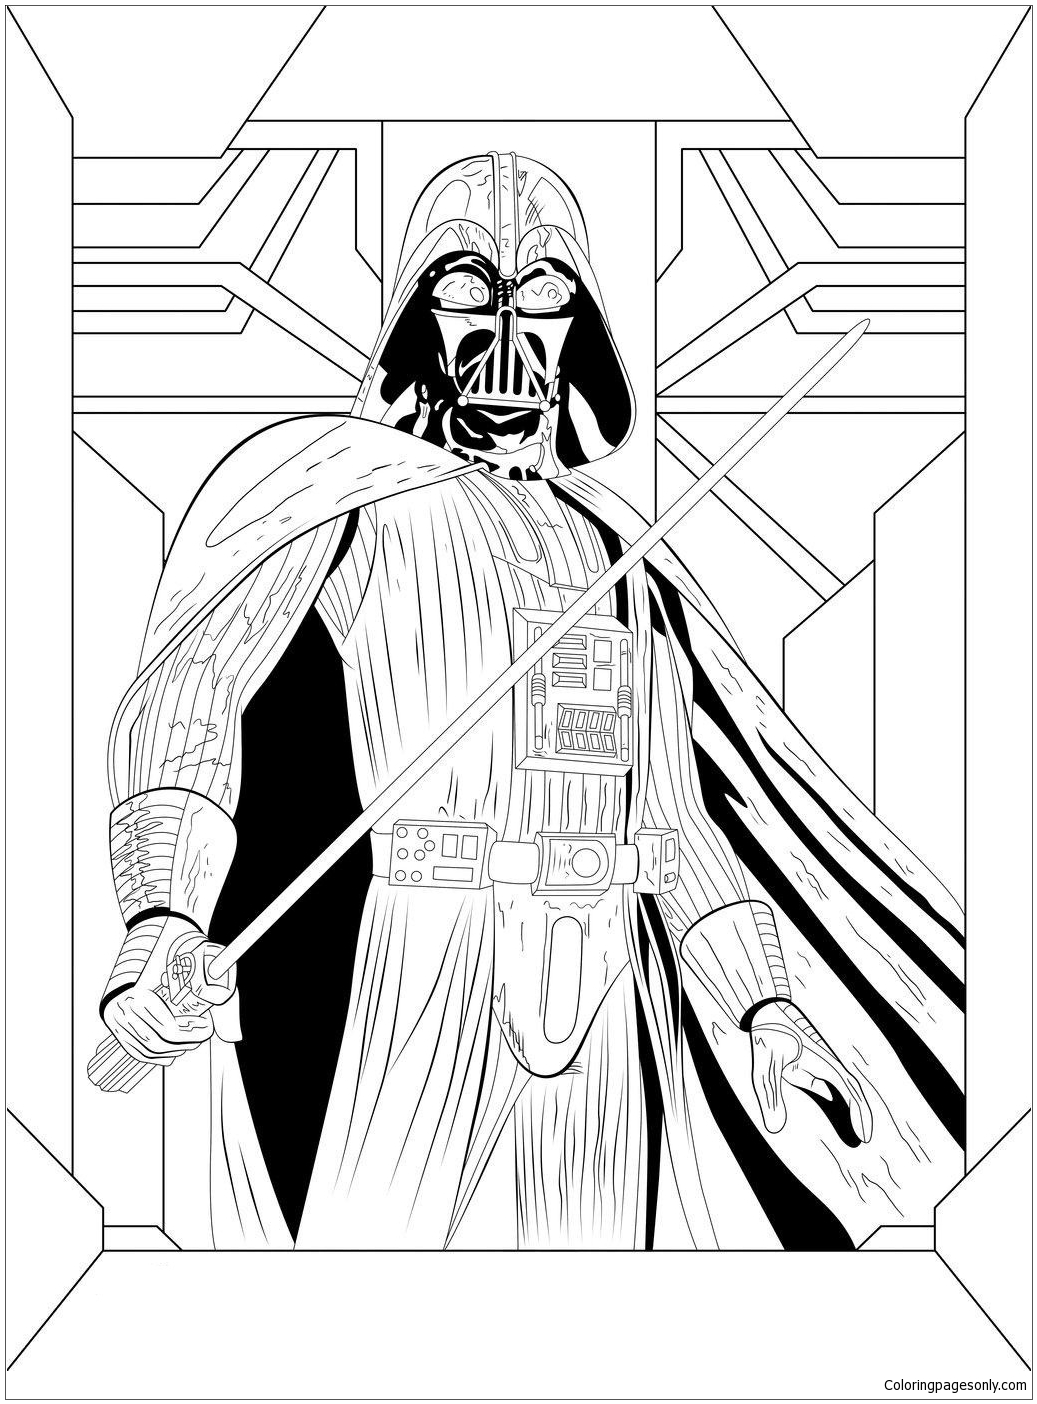 Darth Vader from Star Wars 2 Coloring Pages Cartoons Coloring Pages